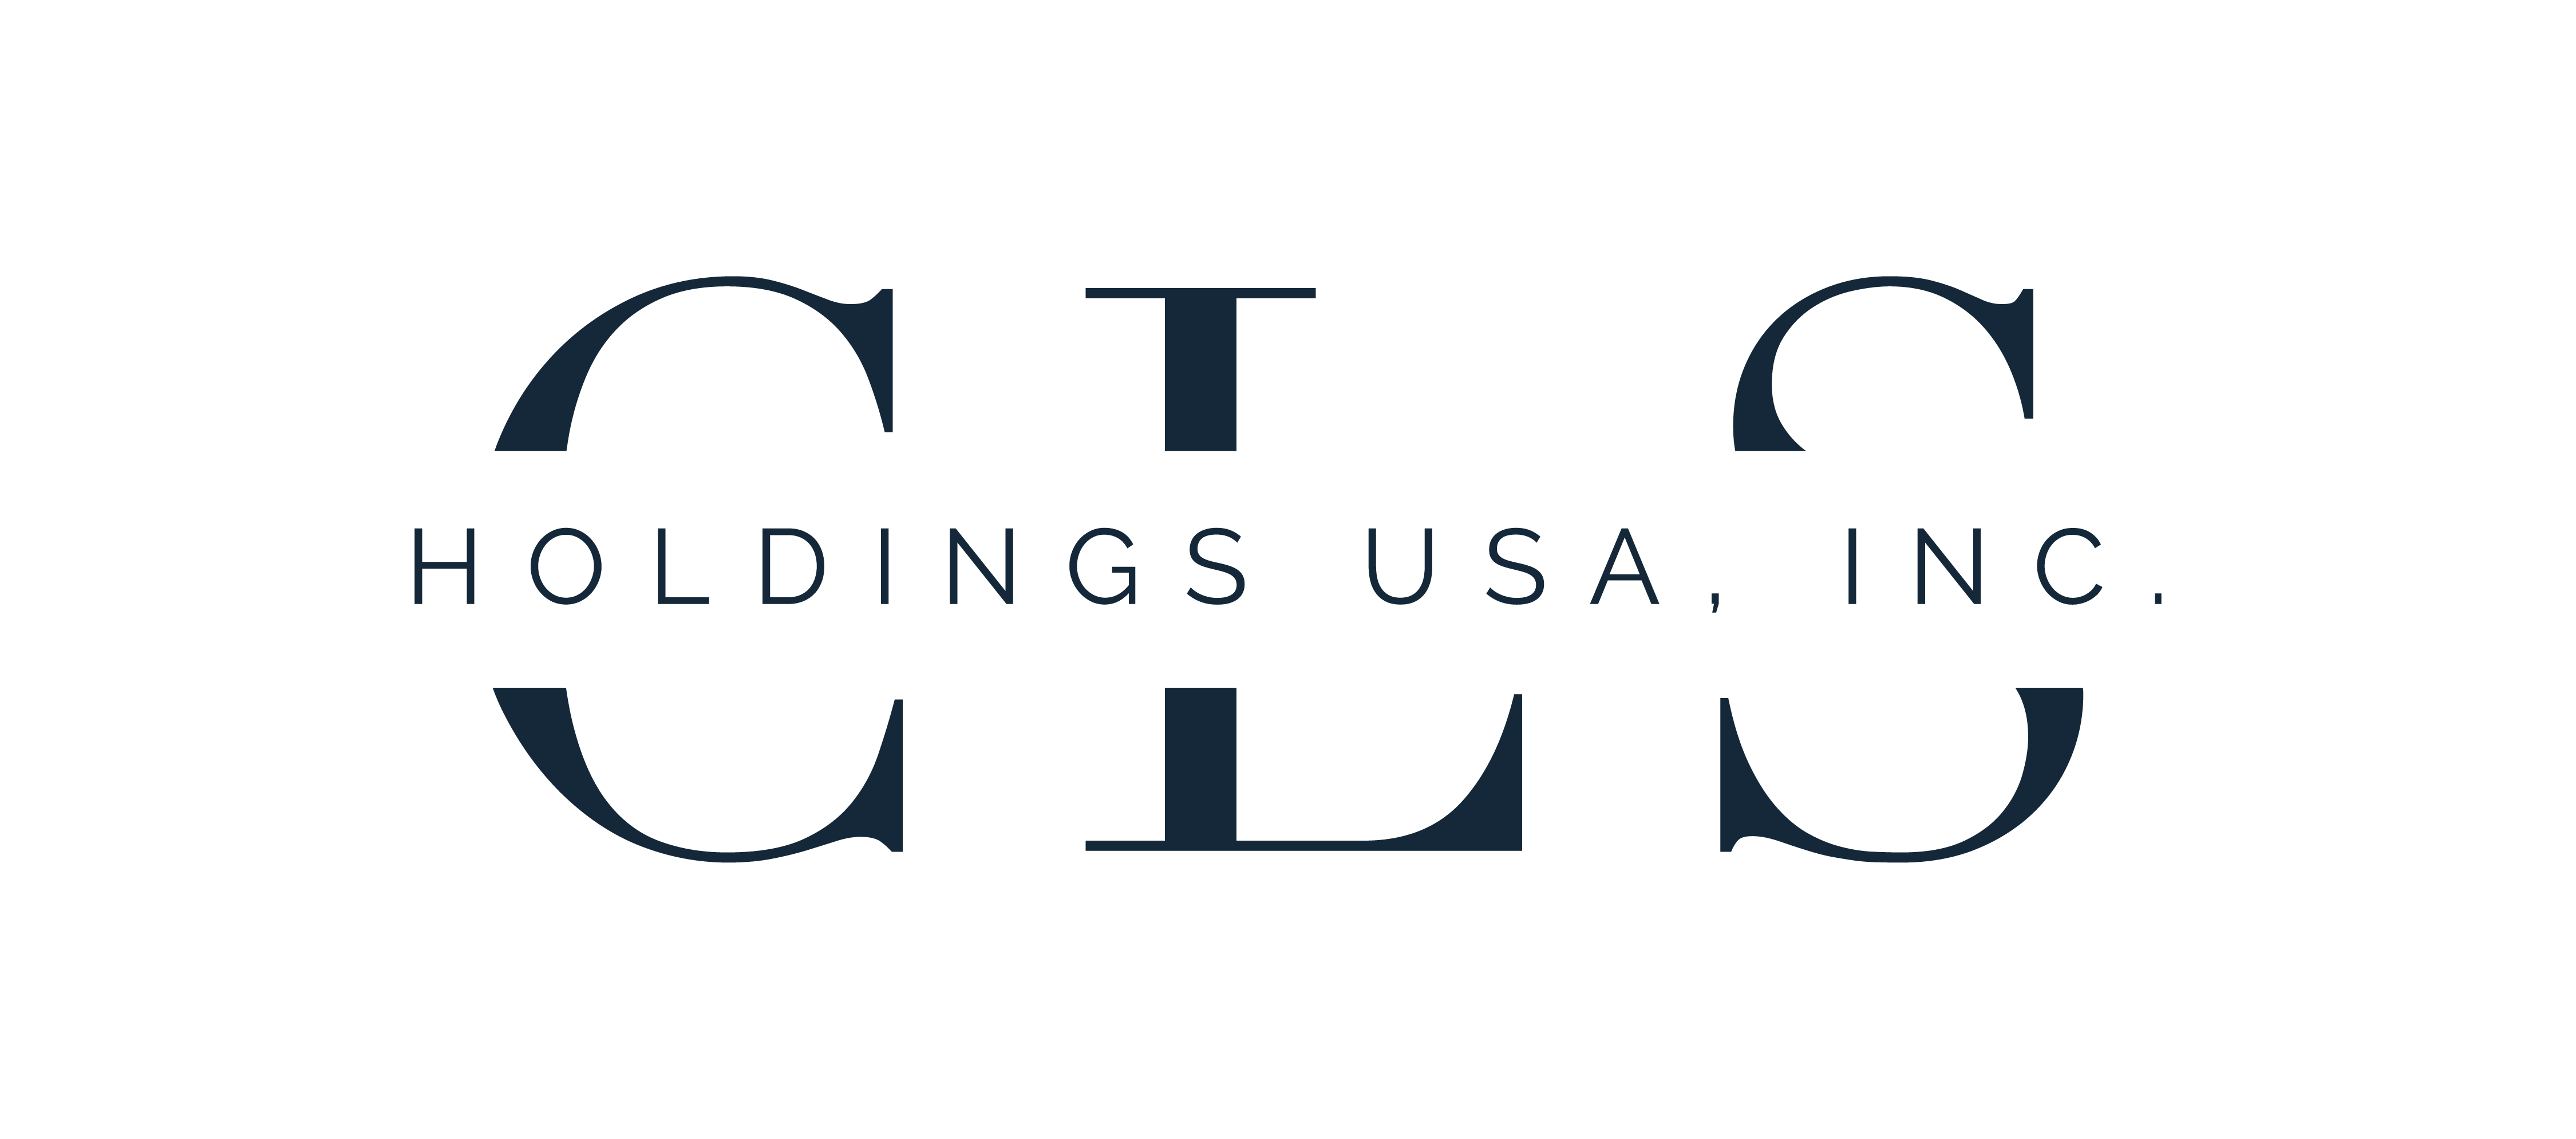 CLS Holdings USA, Inc., Wednesday, August 2, 2023, Press release picture